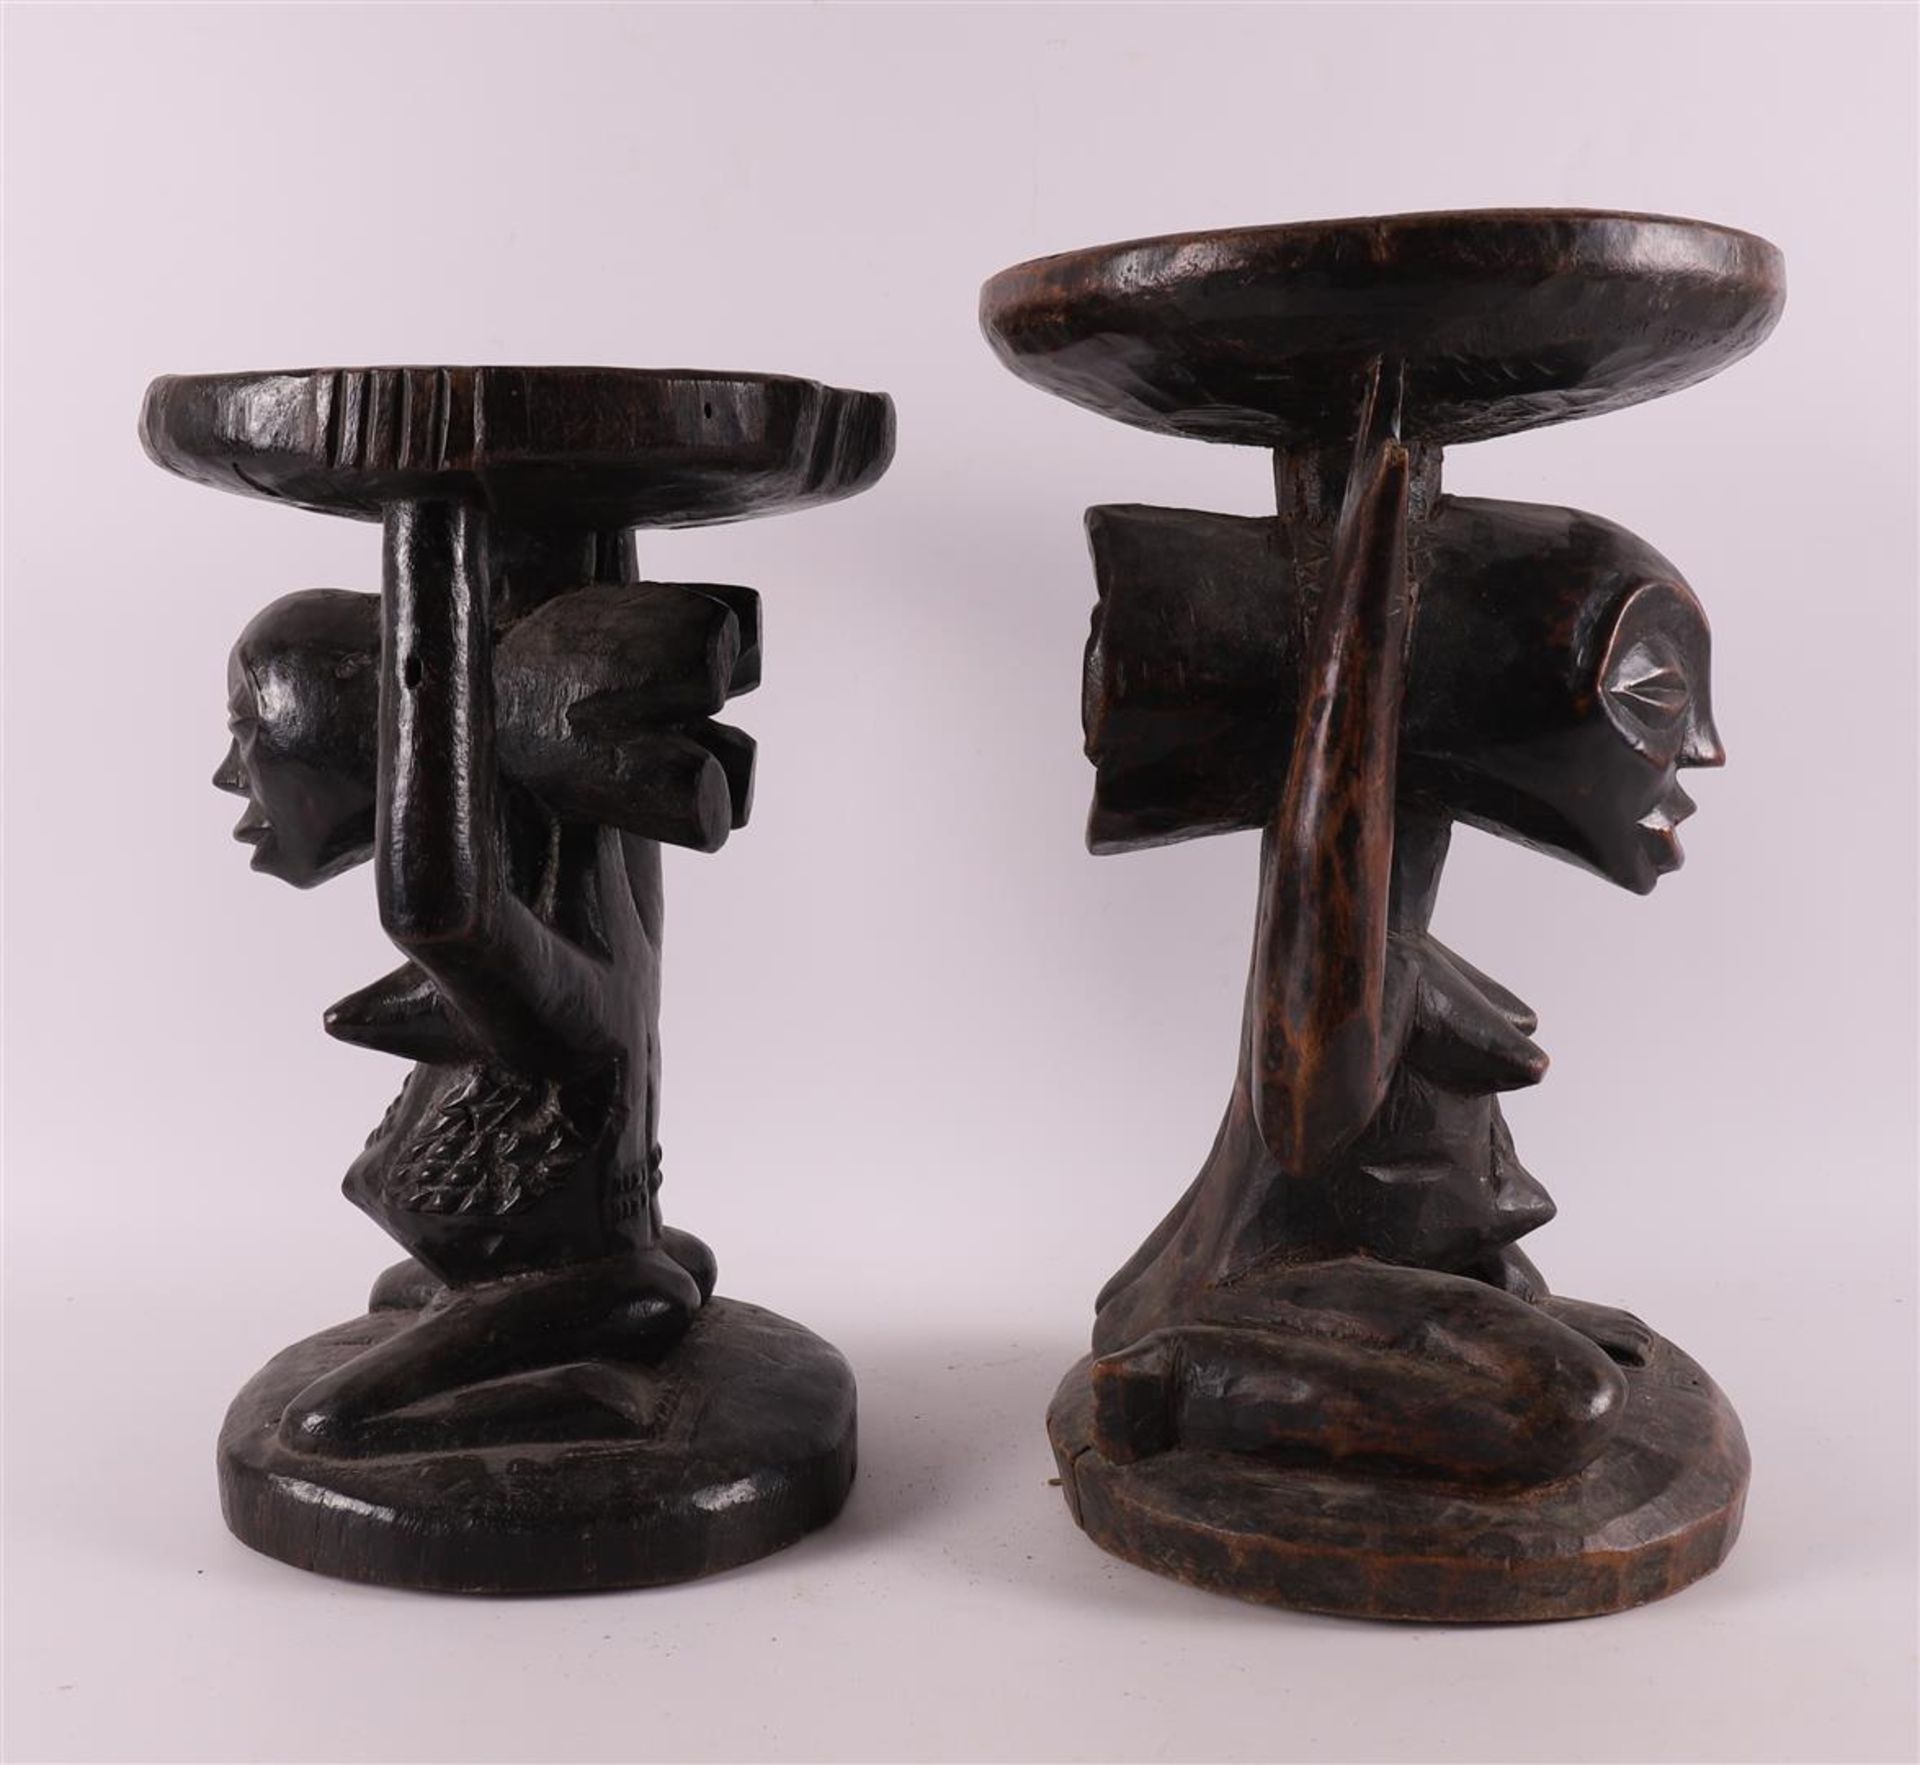 Two carved wooden stools, Luba, Congo, Central Africa, 20th century - Image 4 of 5